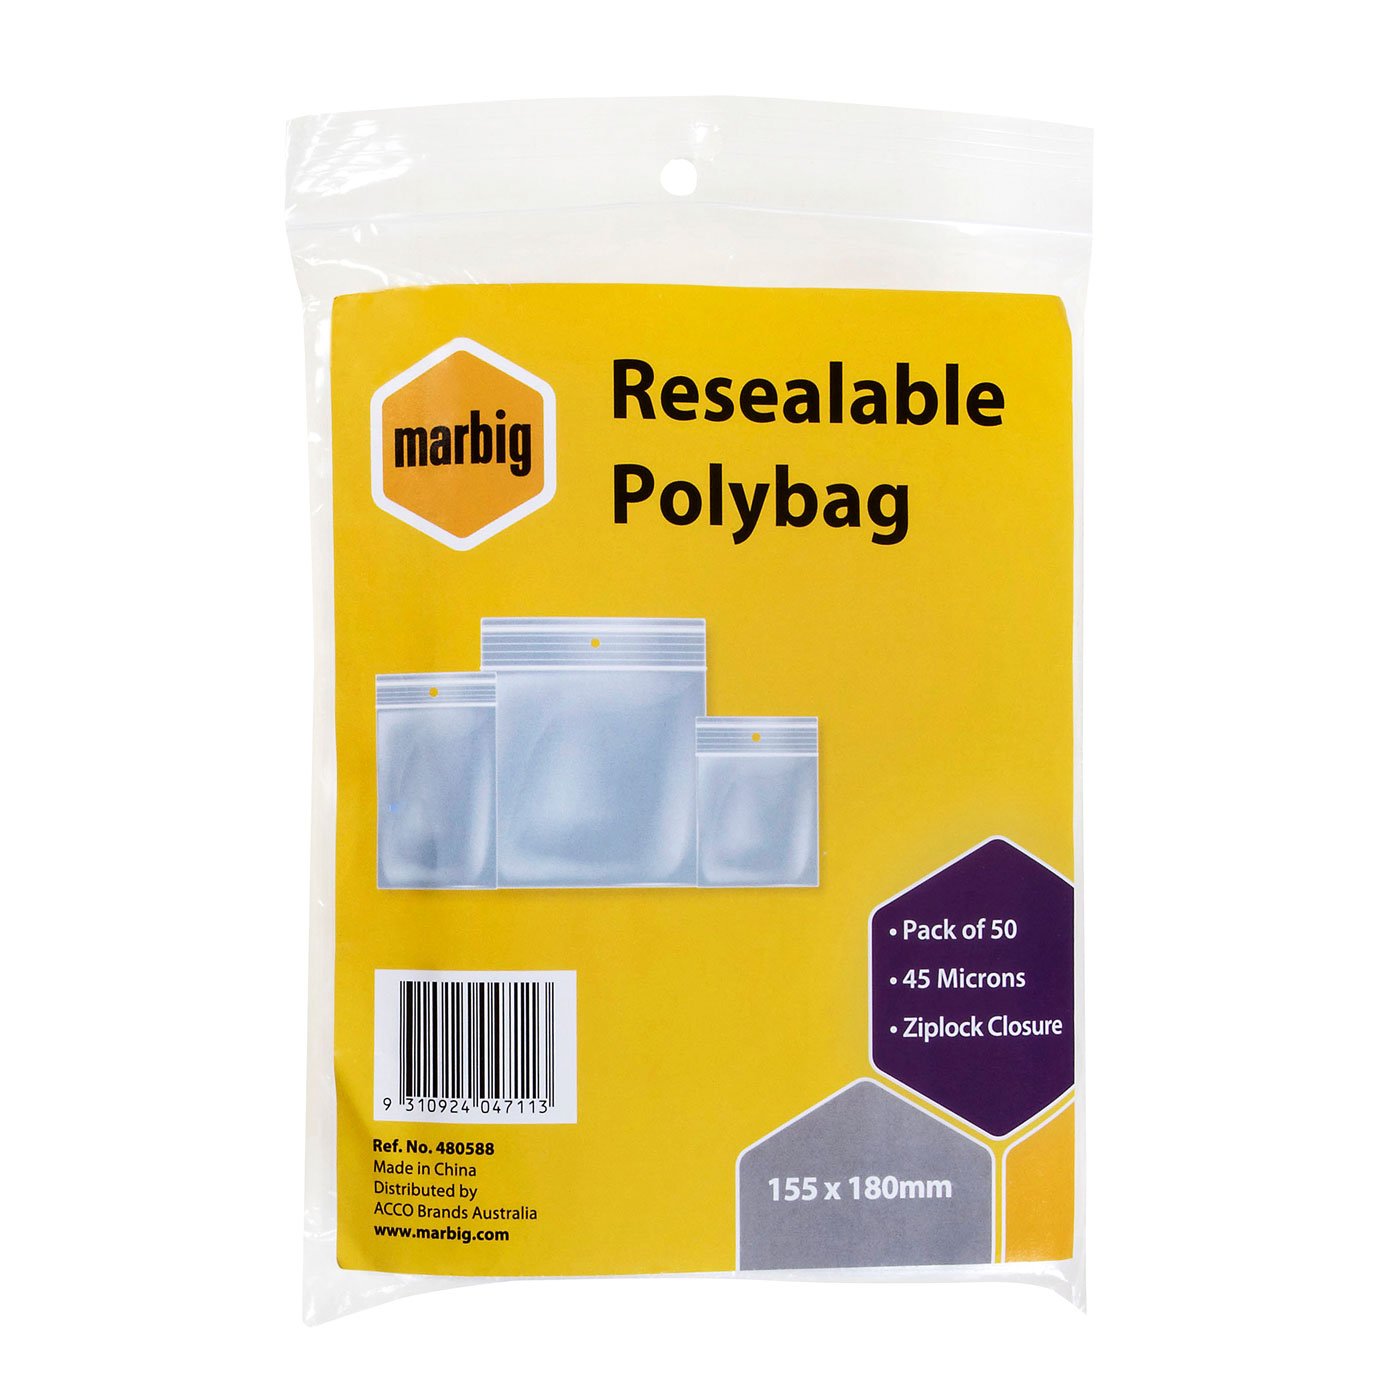 Marbig Resealable Polybag Zip Lock 155 x 180 mm Pack of 50